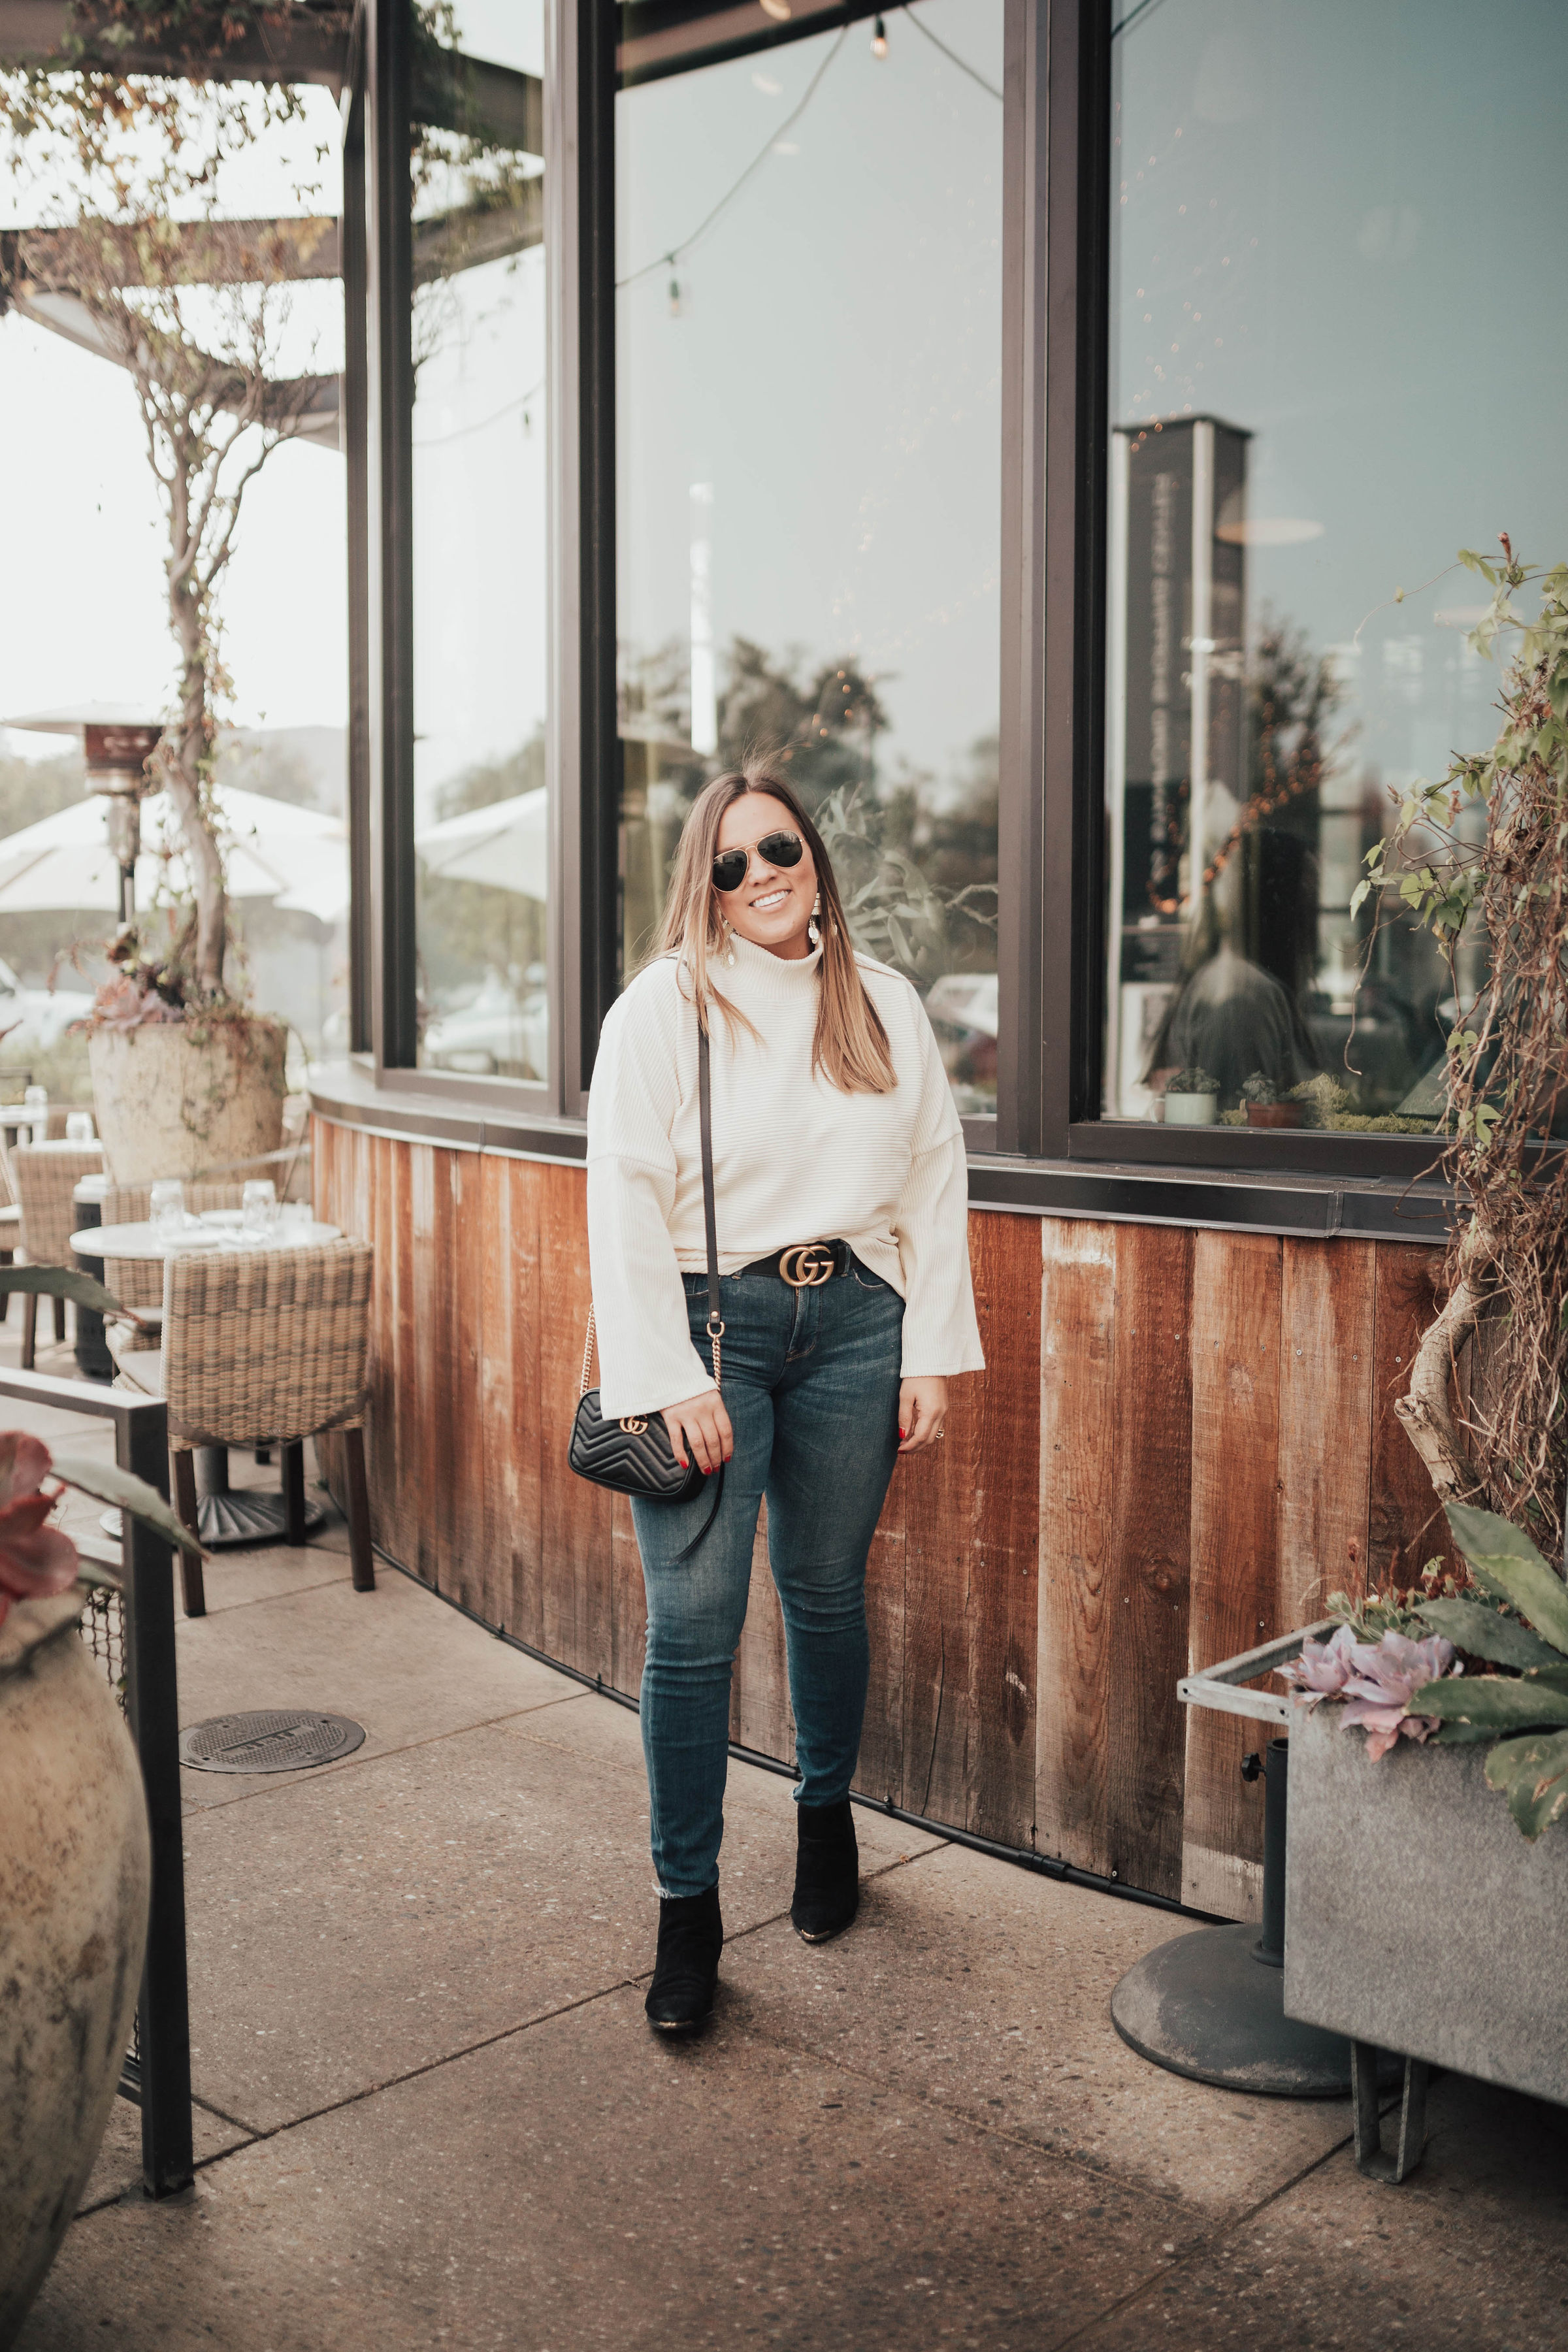 San Francisco bloggers Ashley Zeal and Emily Wieczorek share their November Top Ten Sellers featuring all the top-selling products that you guys have been buying!